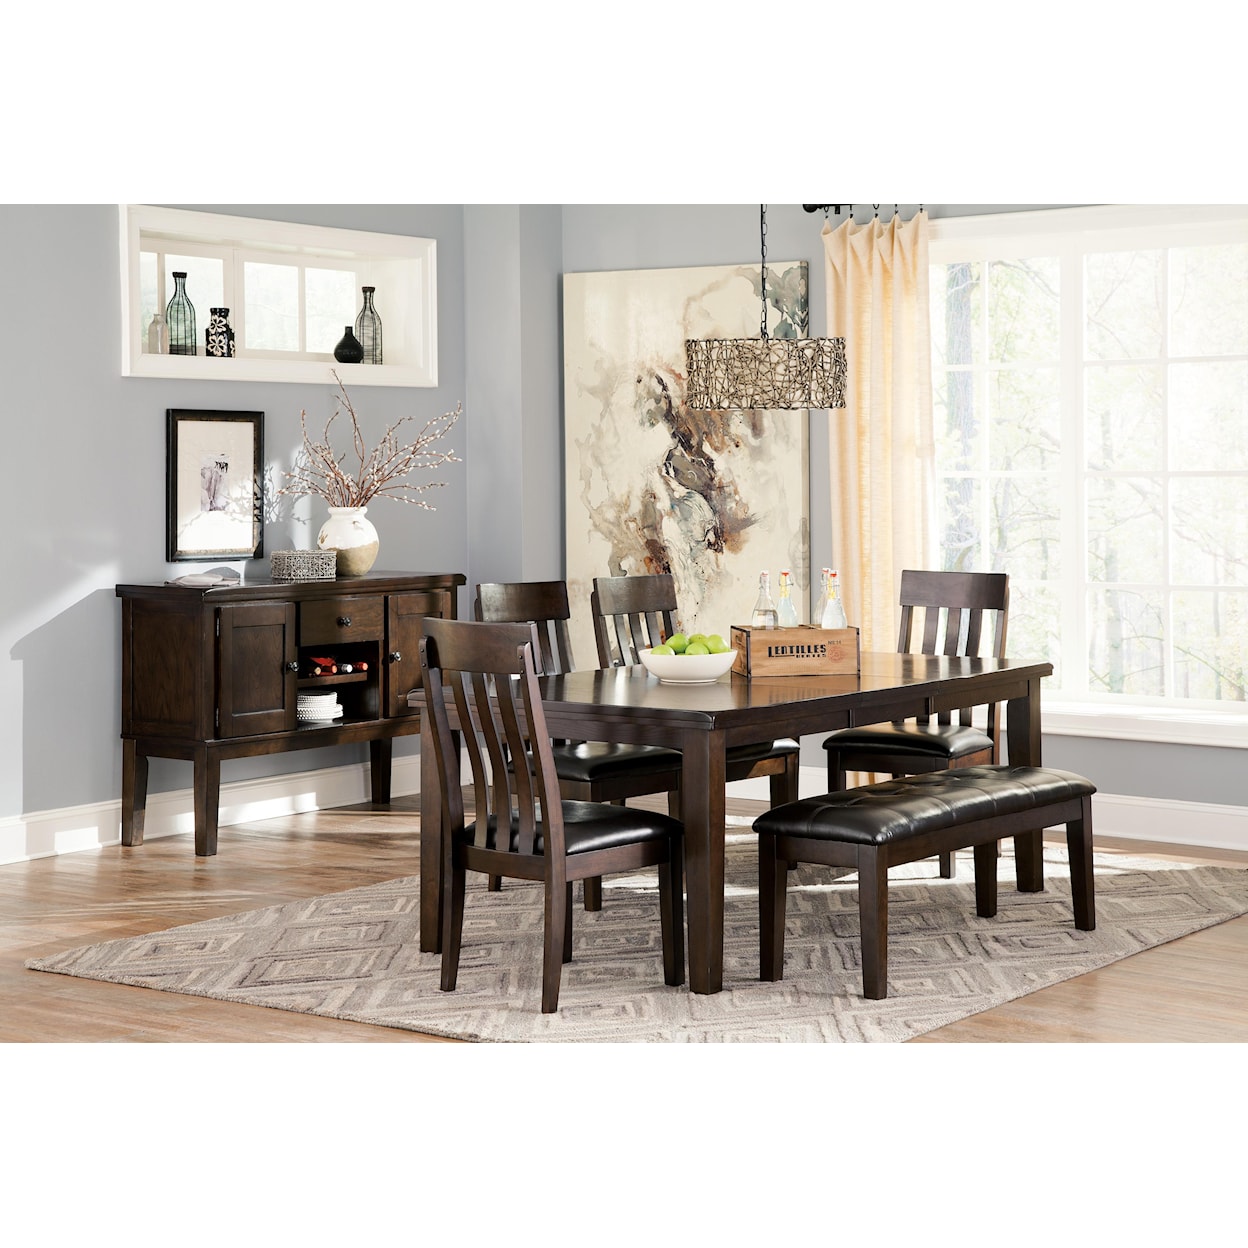 Signature Design by Ashley Haddigan 6-Piece Table, Chair and Bench Set